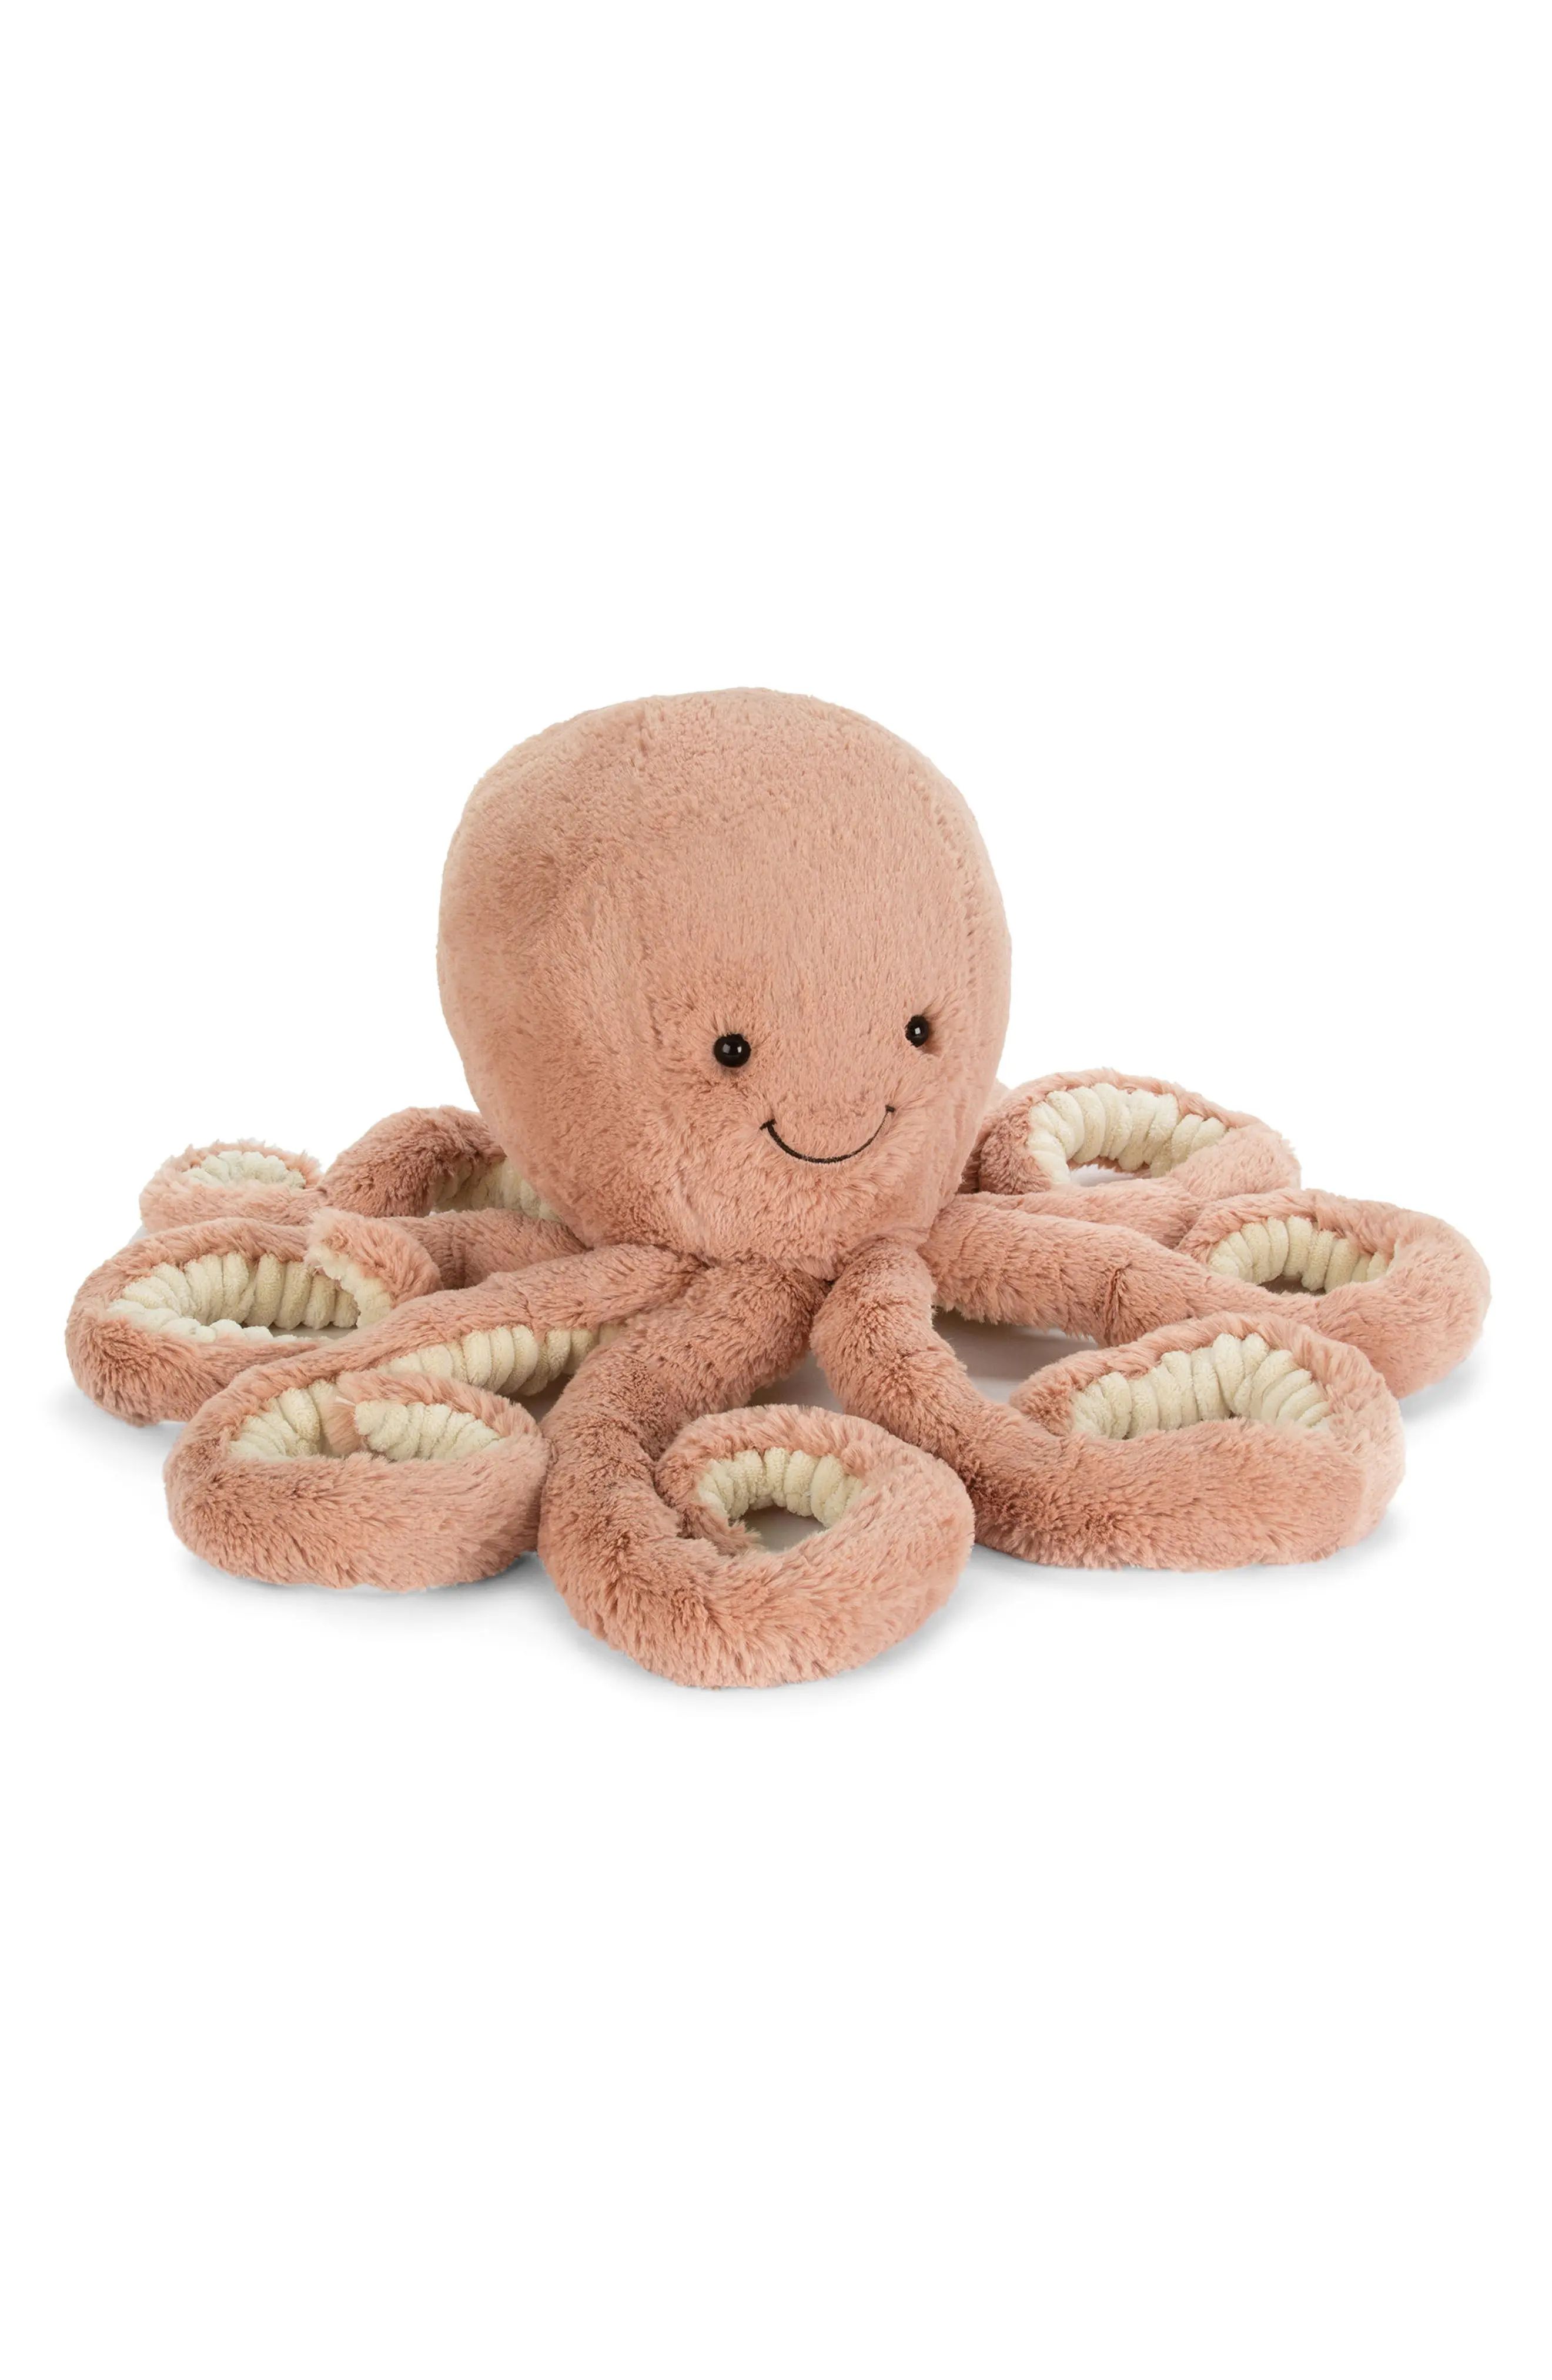 Infant Jellycat Small Odell Octopus Stuffed Animal | Nordstrom